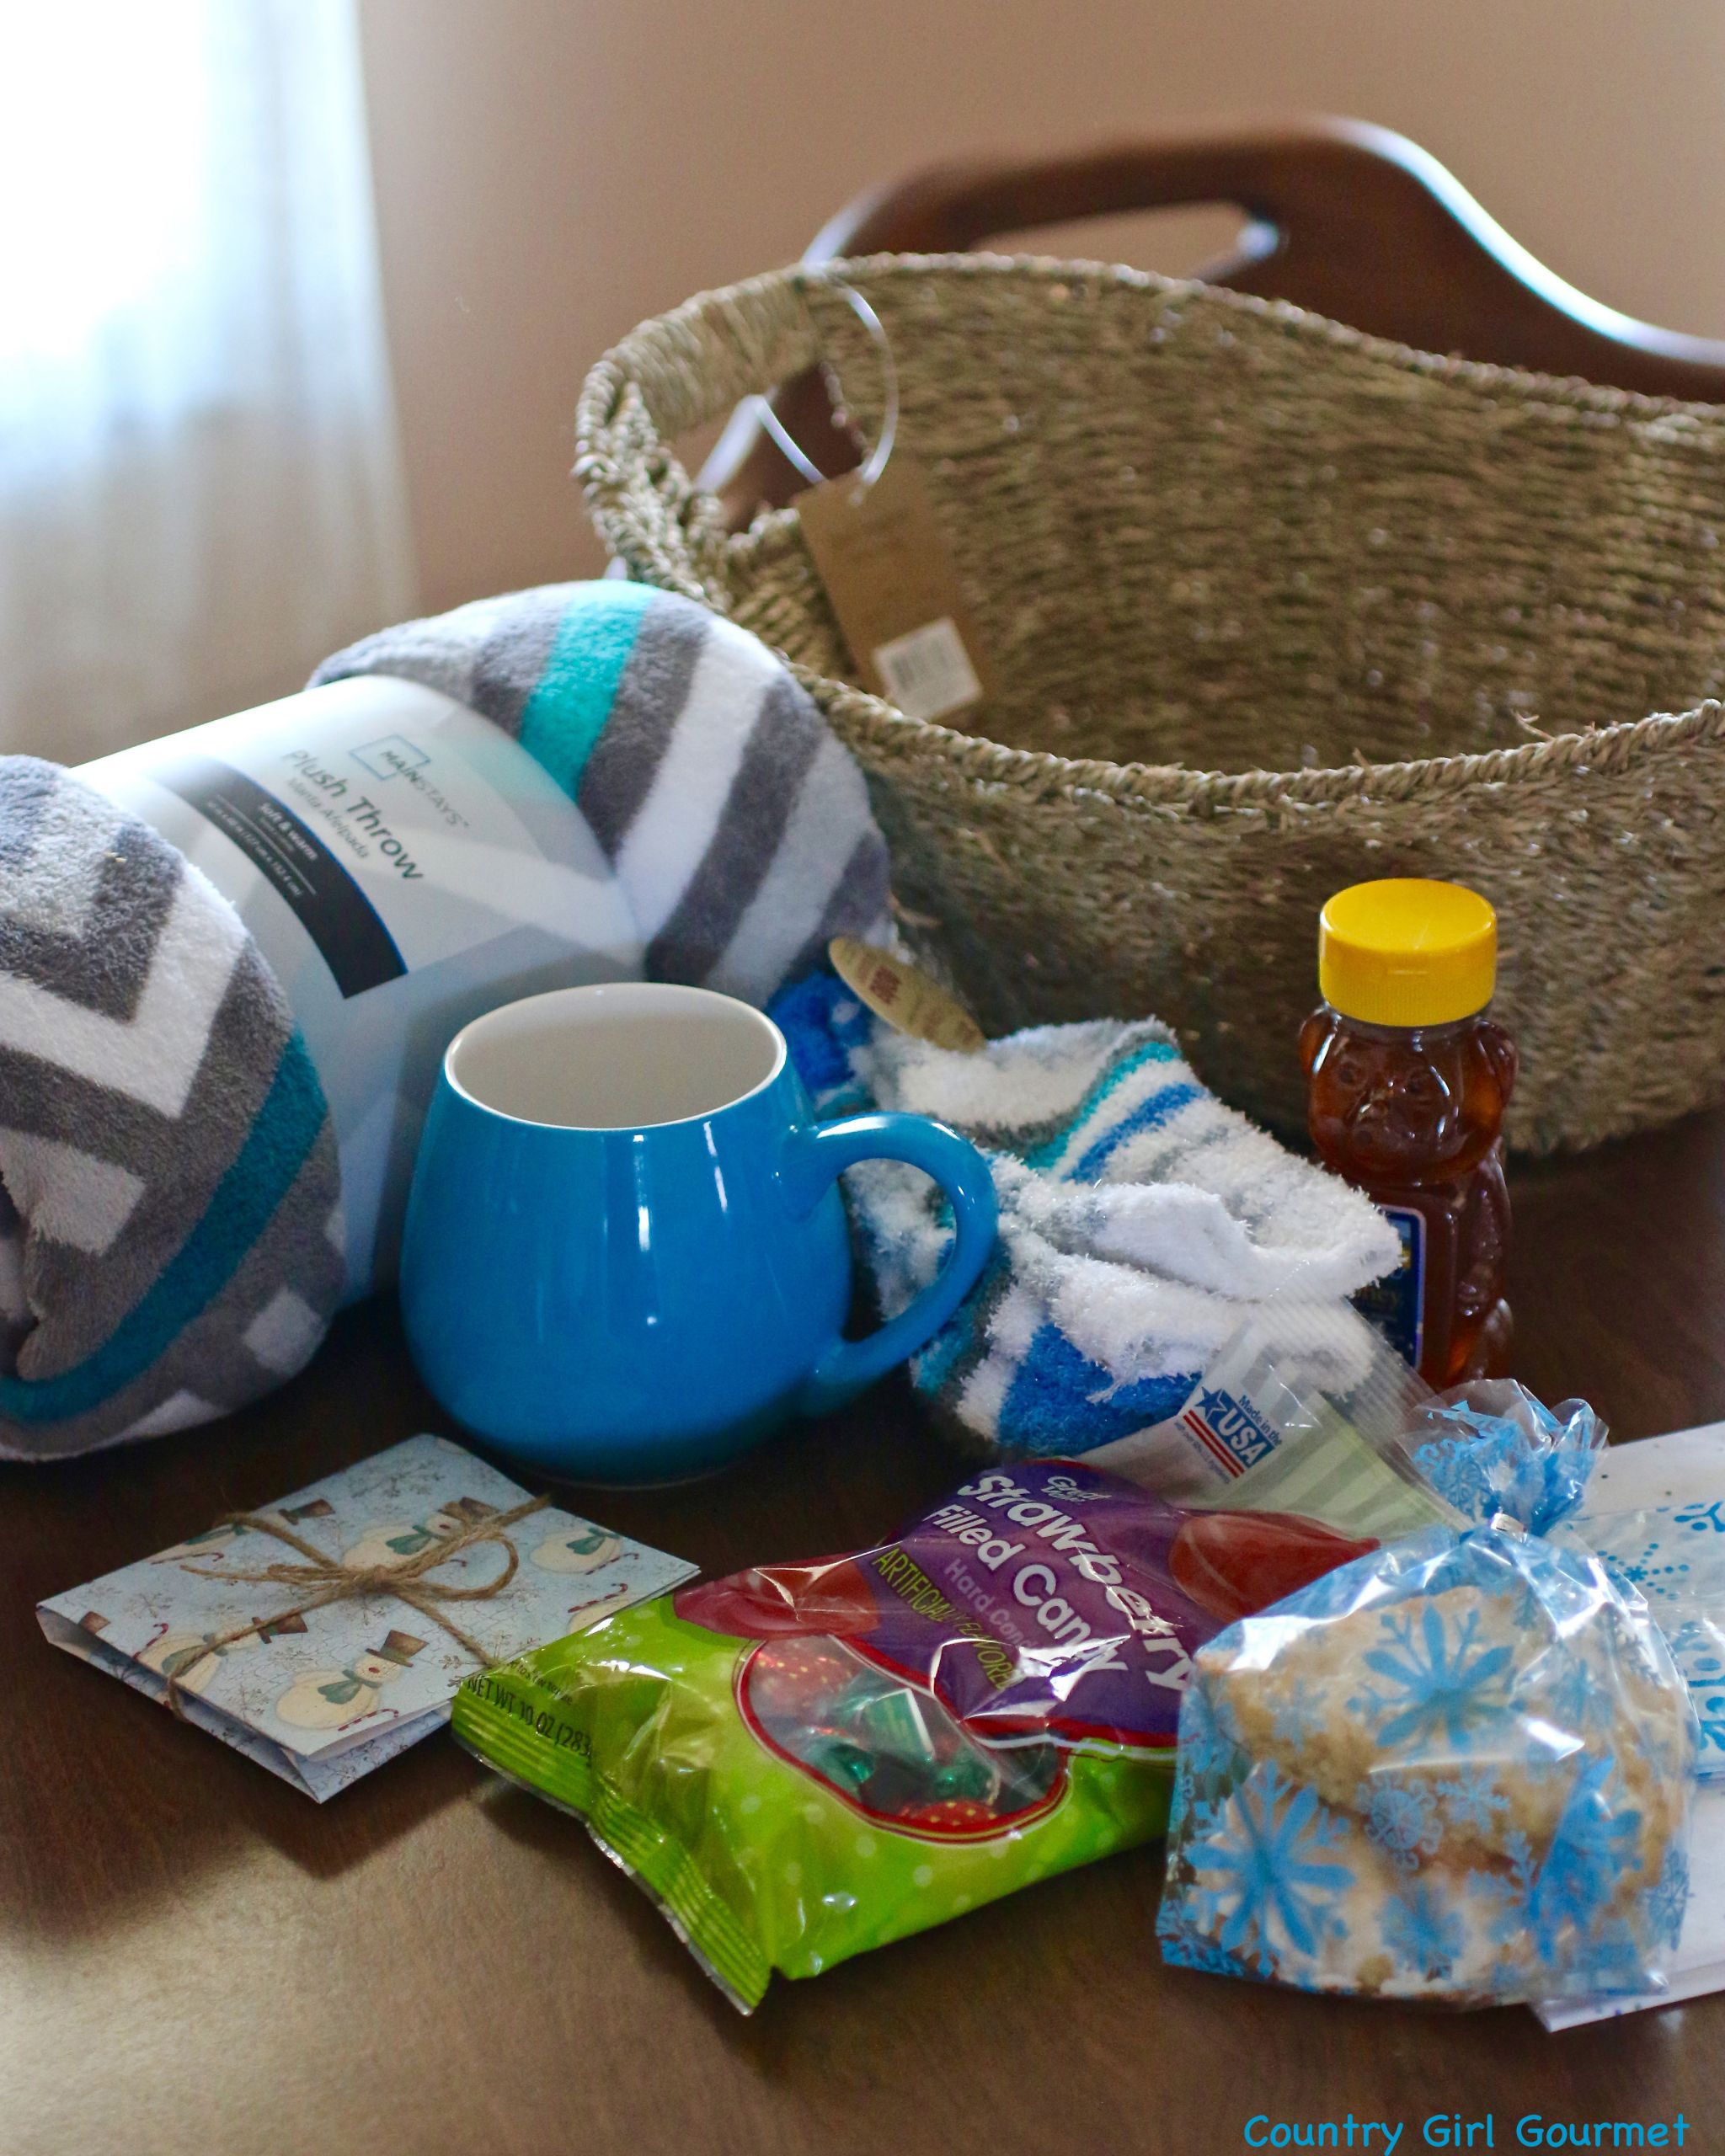 Warm And Cozy Gift Basket Ideas
 DIY Warm and Cozy Gift Basket My Hot Southern Mess